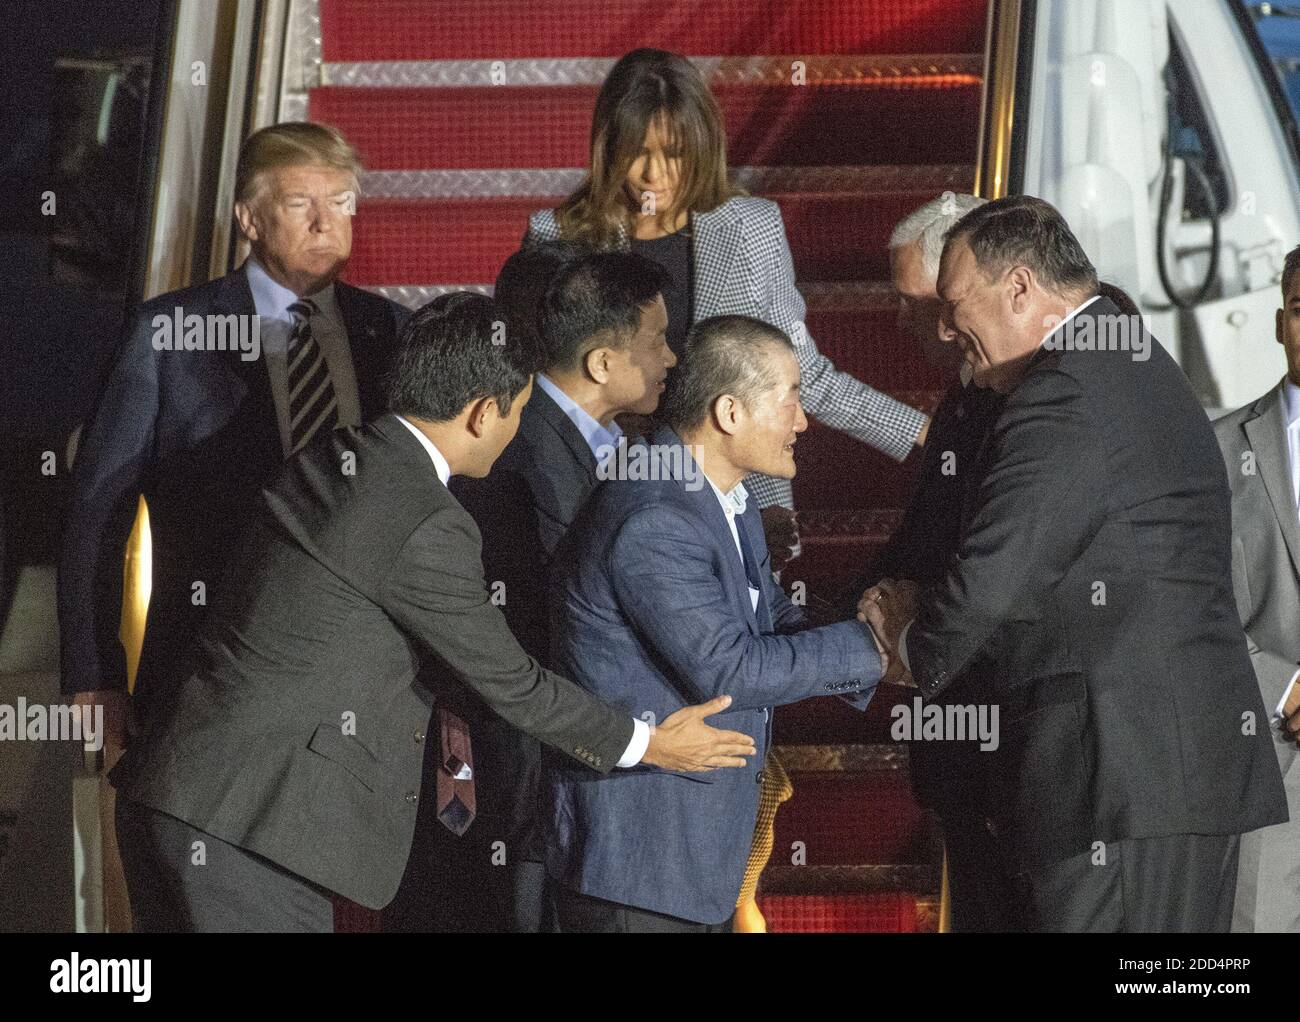 Kim Dong Chul, Kim Hak Song and Tony Kim are greeted by United States President Donald J. Trump arrived at Joint Base Andrews in Maryland to welcome Kim Dong Chul, Kim Hak Song and Tony Kim back to the US on Thursday, May 10, 2018. The three men were imprisoned in North Korea for periods ranging from one and two years. They were released to US Secretary of State Mike Pompeo as a good-will gesture in the lead-up to the talks between President Trump and North Korean leader Kim Jong Un. Photo by Ron Sachs/CNP/ABACAPRESS.COM Stock Photo